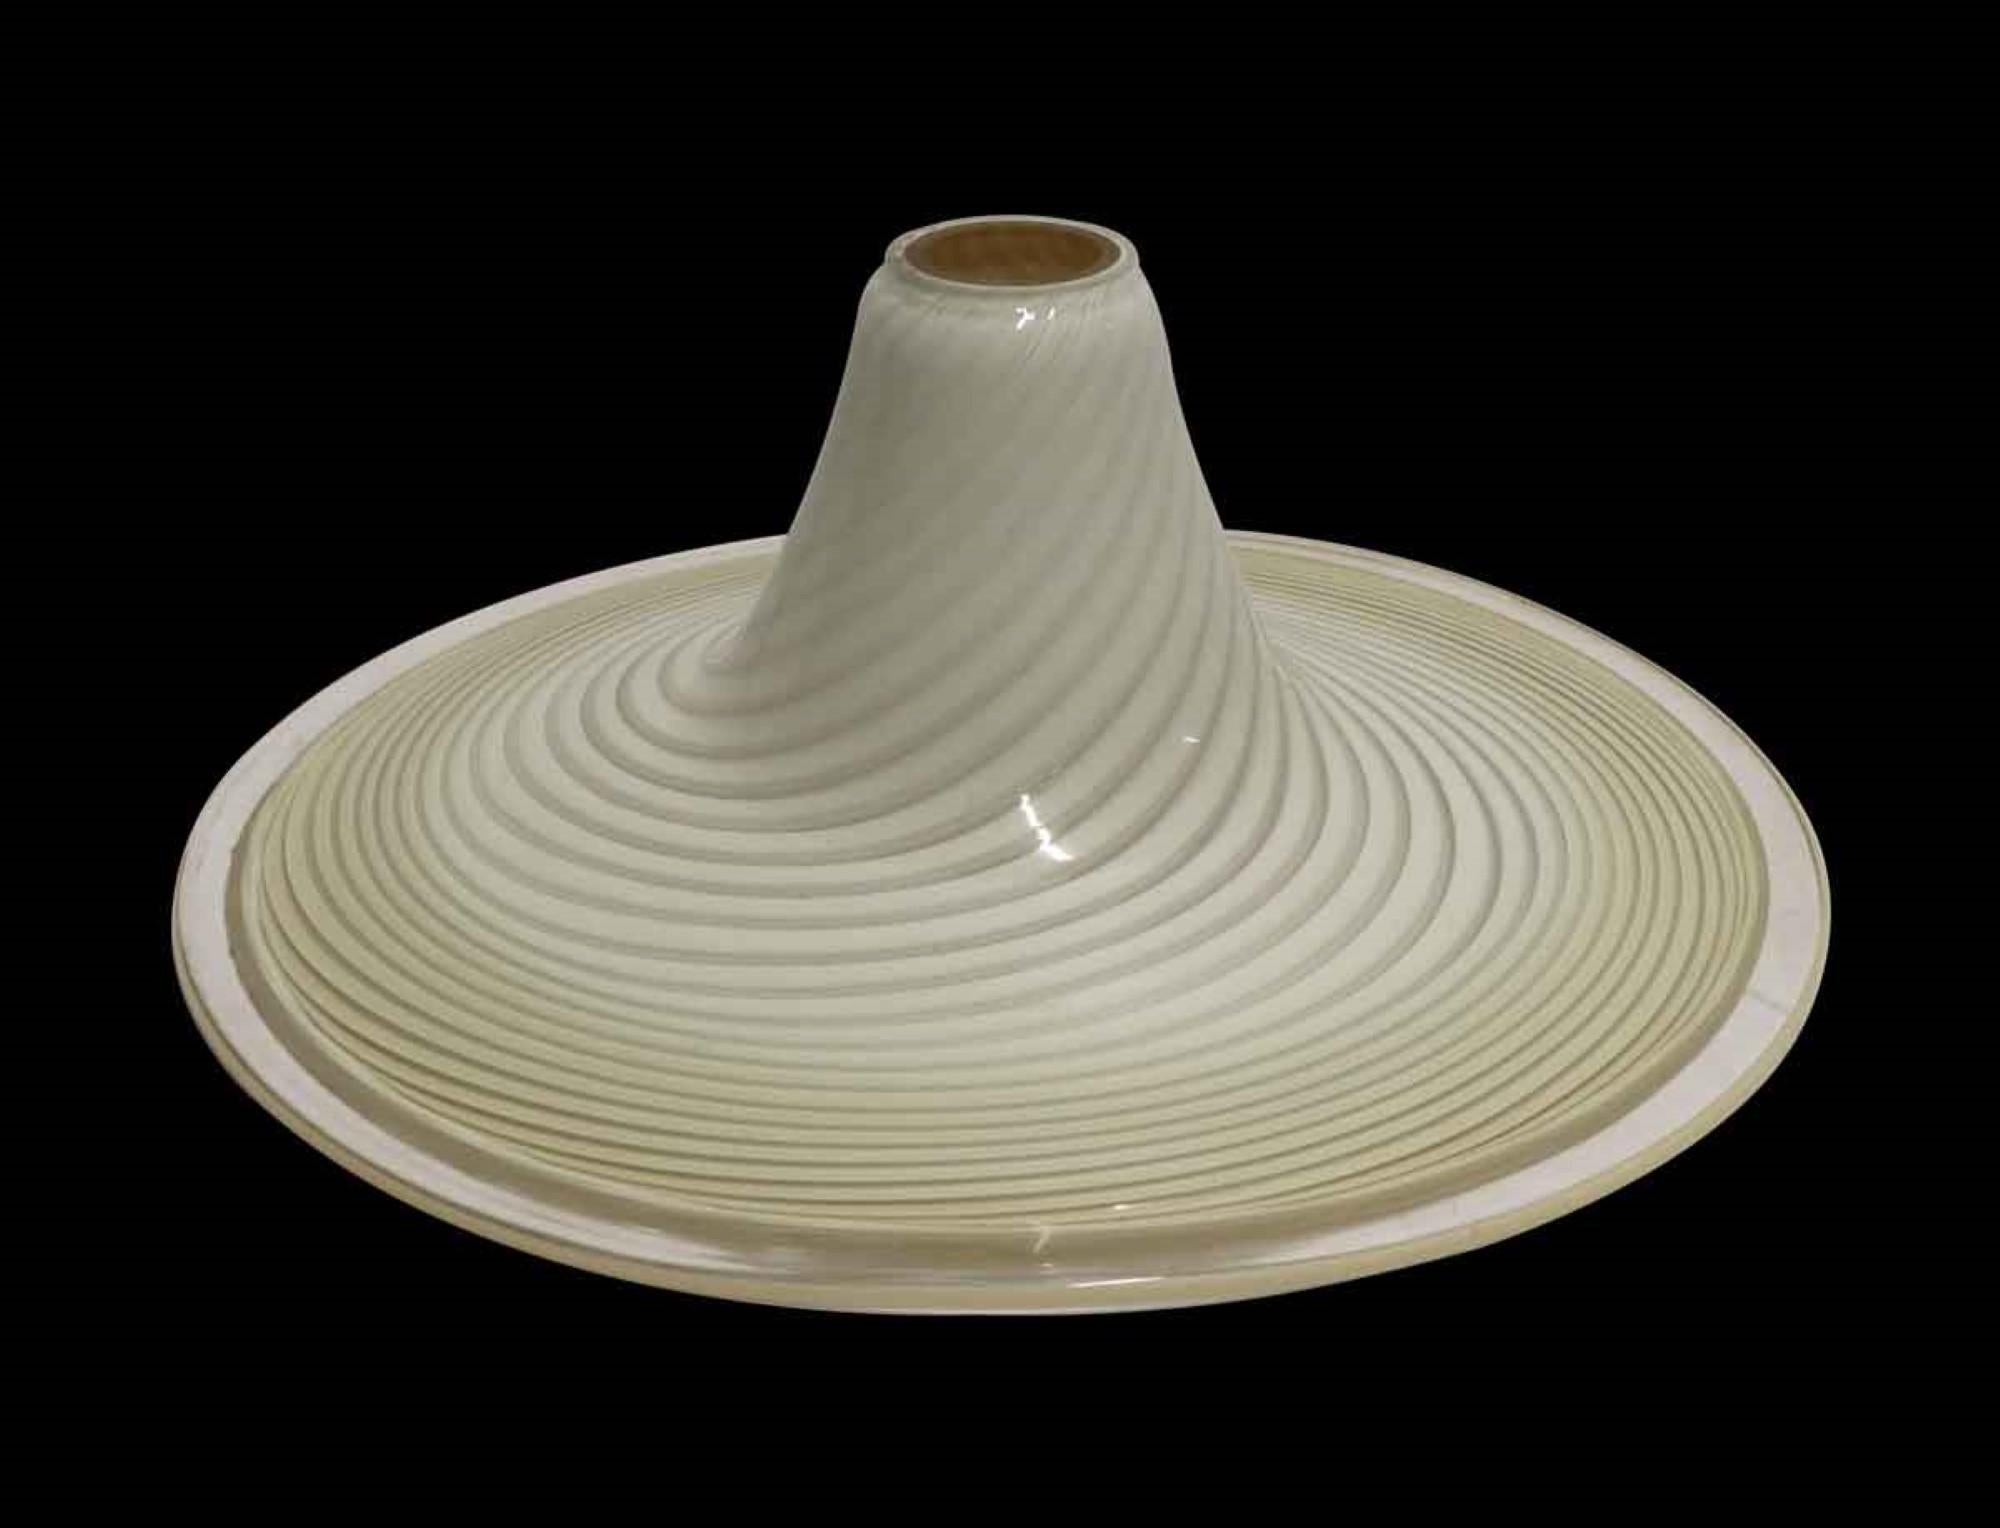 1980s murano glass shade hand blown in Italy. Alternating white and tan swirls. This can be seen at our 400 Gilligan St location in Scranton, PA.